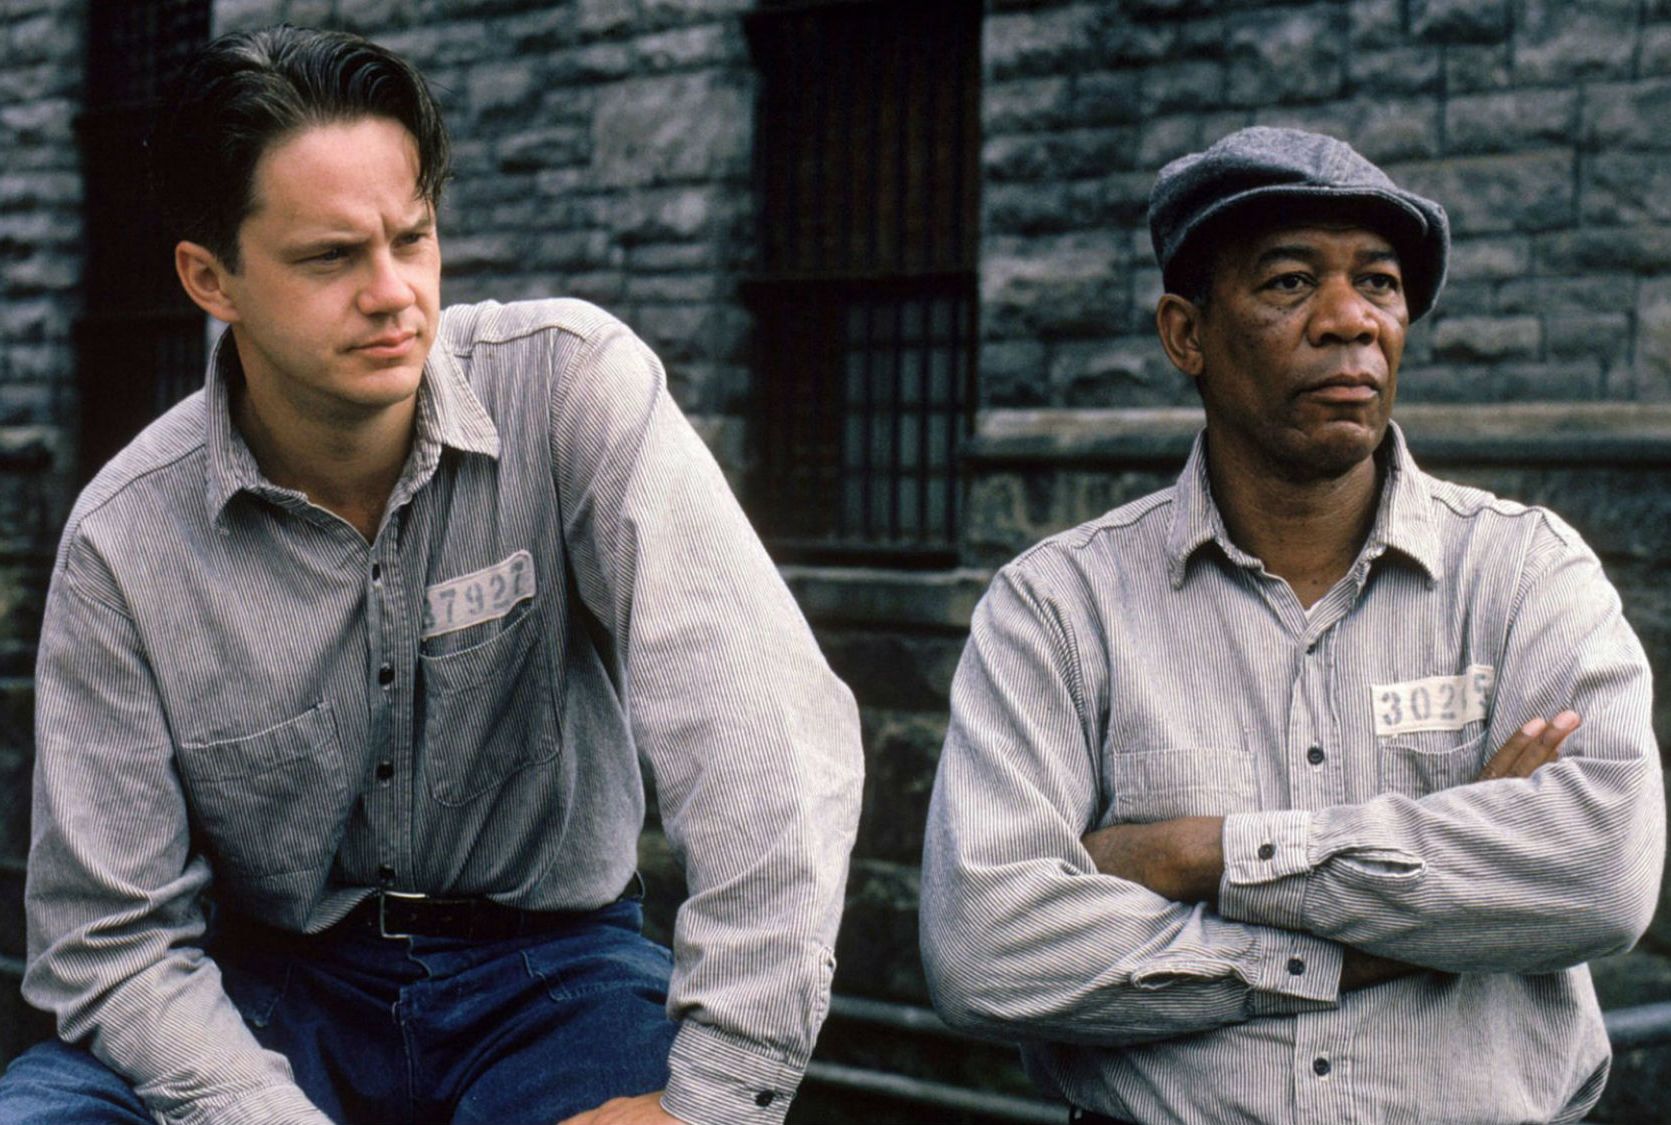 movies with great plot twists  - short shank redemption - 87927 30219